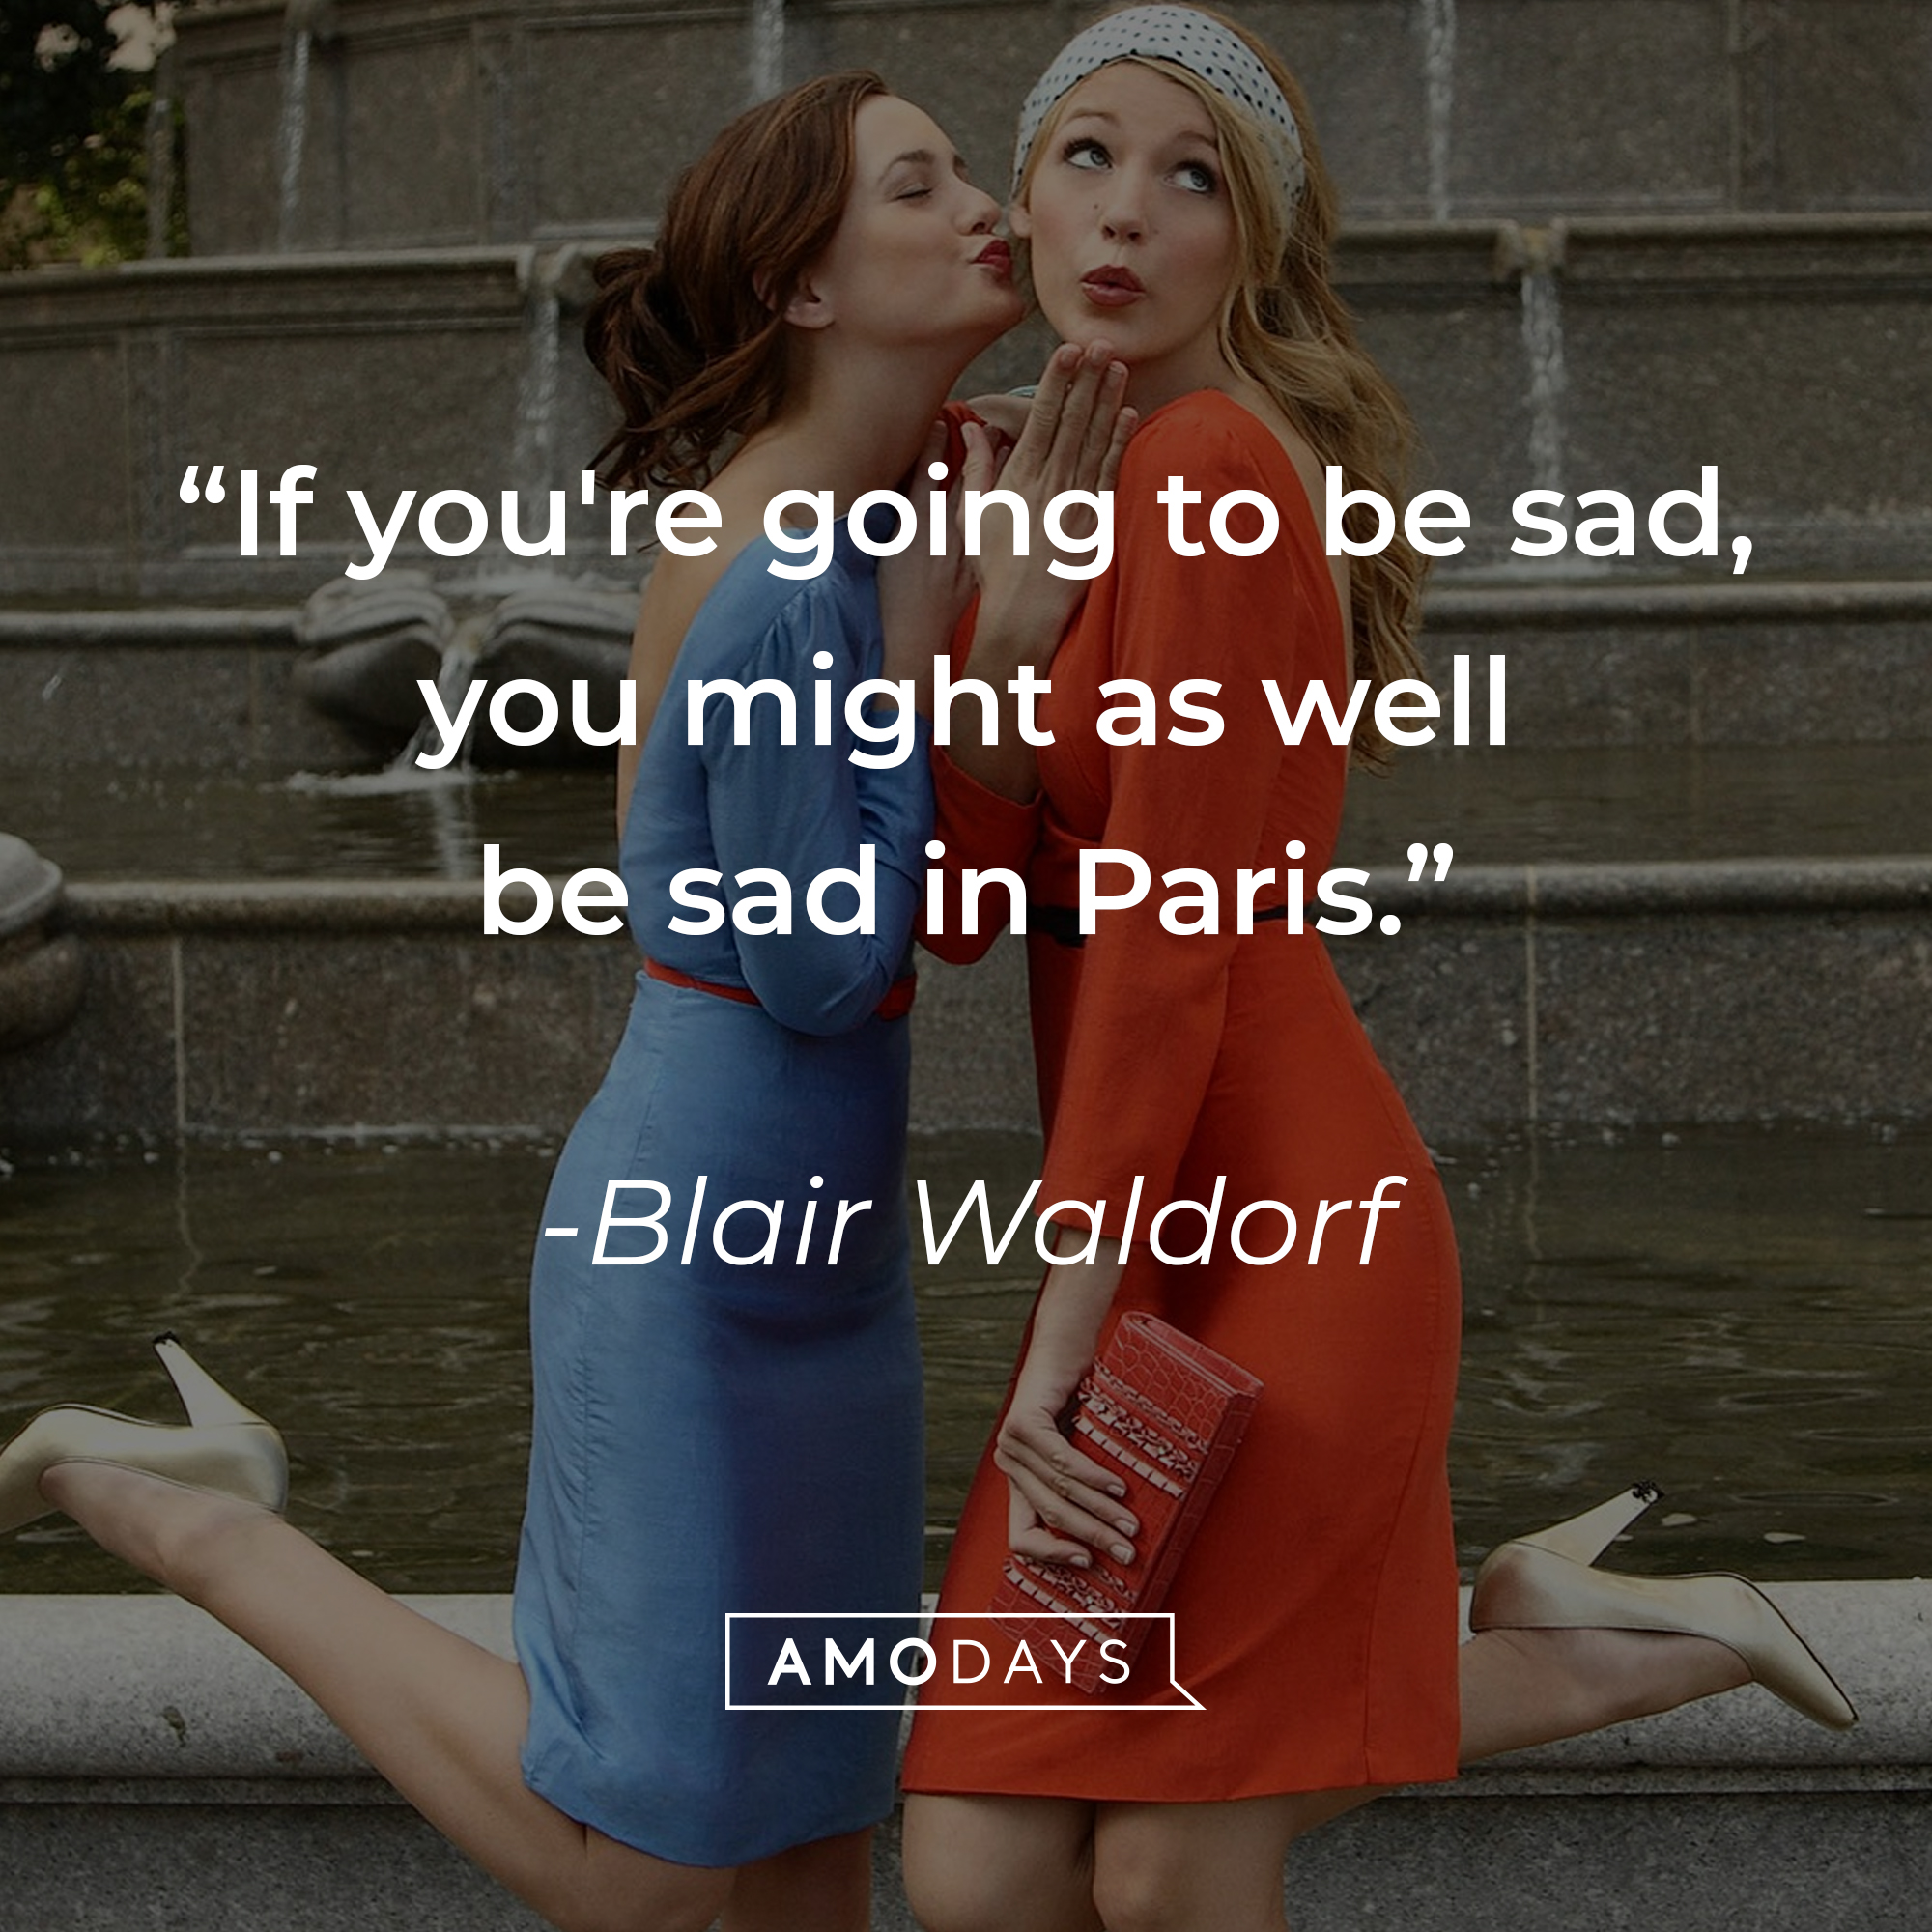 Image from "Gossip Girl" with Blair Waldrof's quote: "If you're going to be sad, you might as well be sad in Paris." | Source: facebook.com/GossipGirl